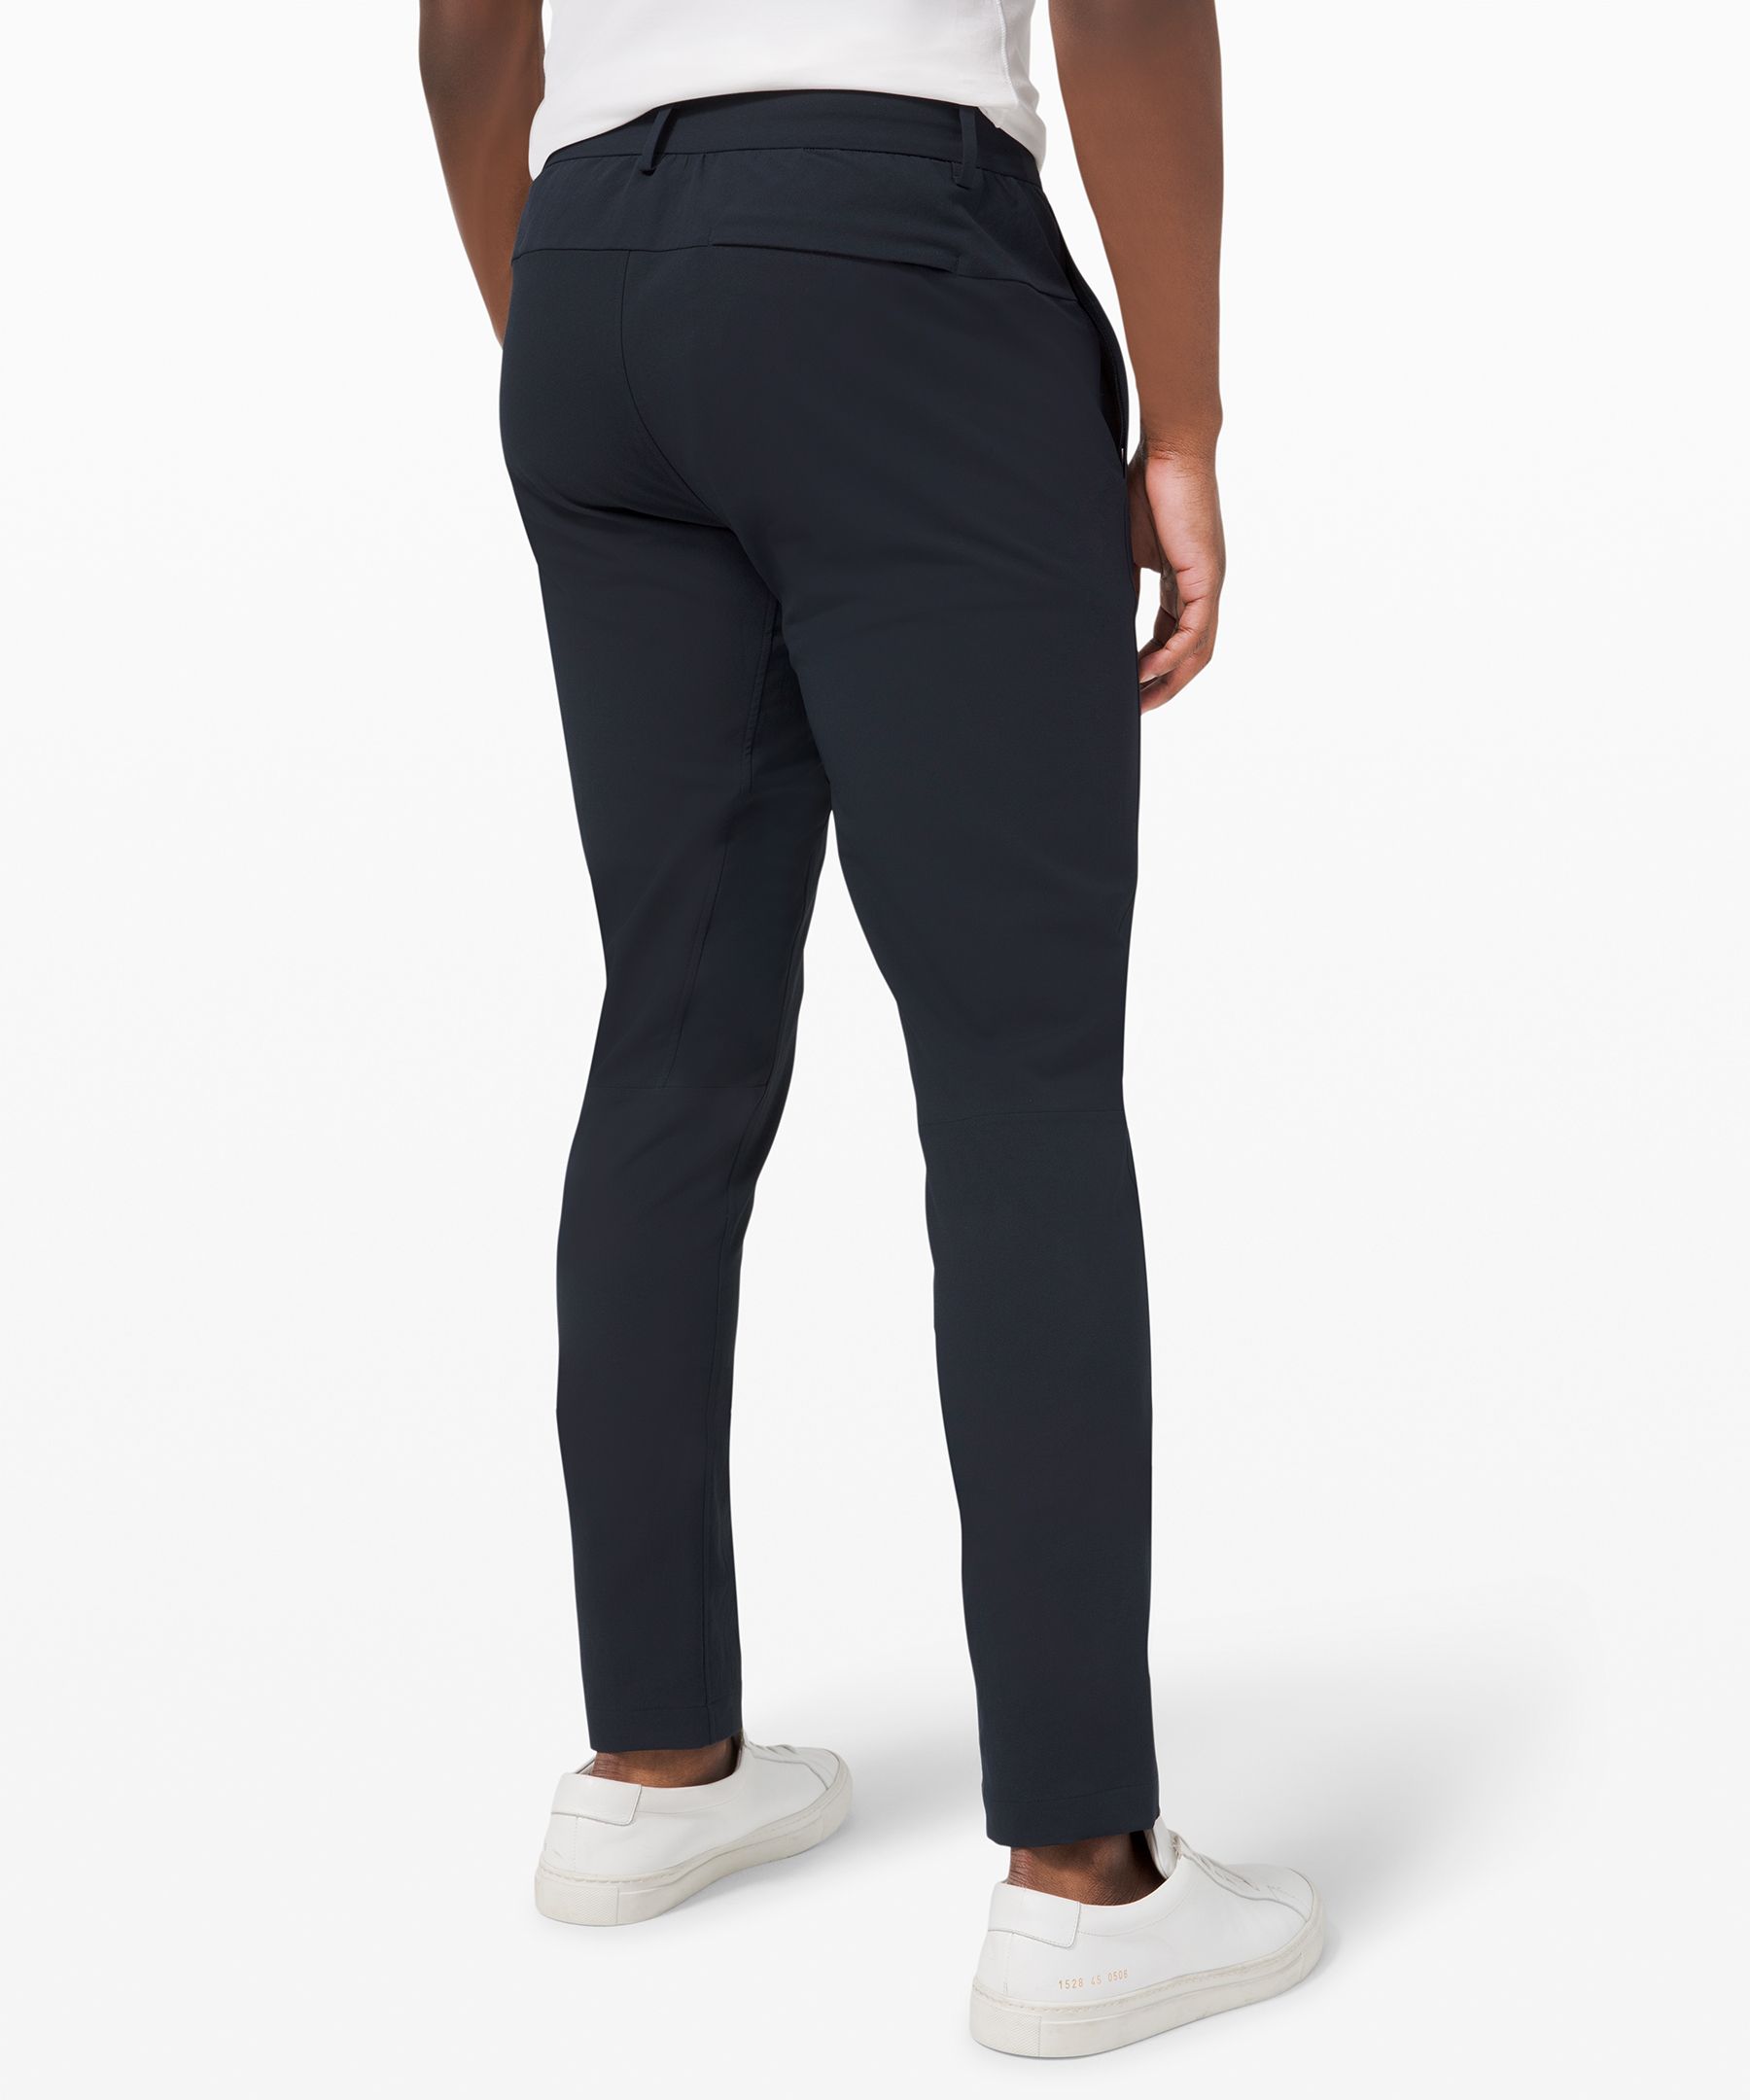 Lululemon New Venture Pant Reviewed Articles  International Society of  Precision Agriculture